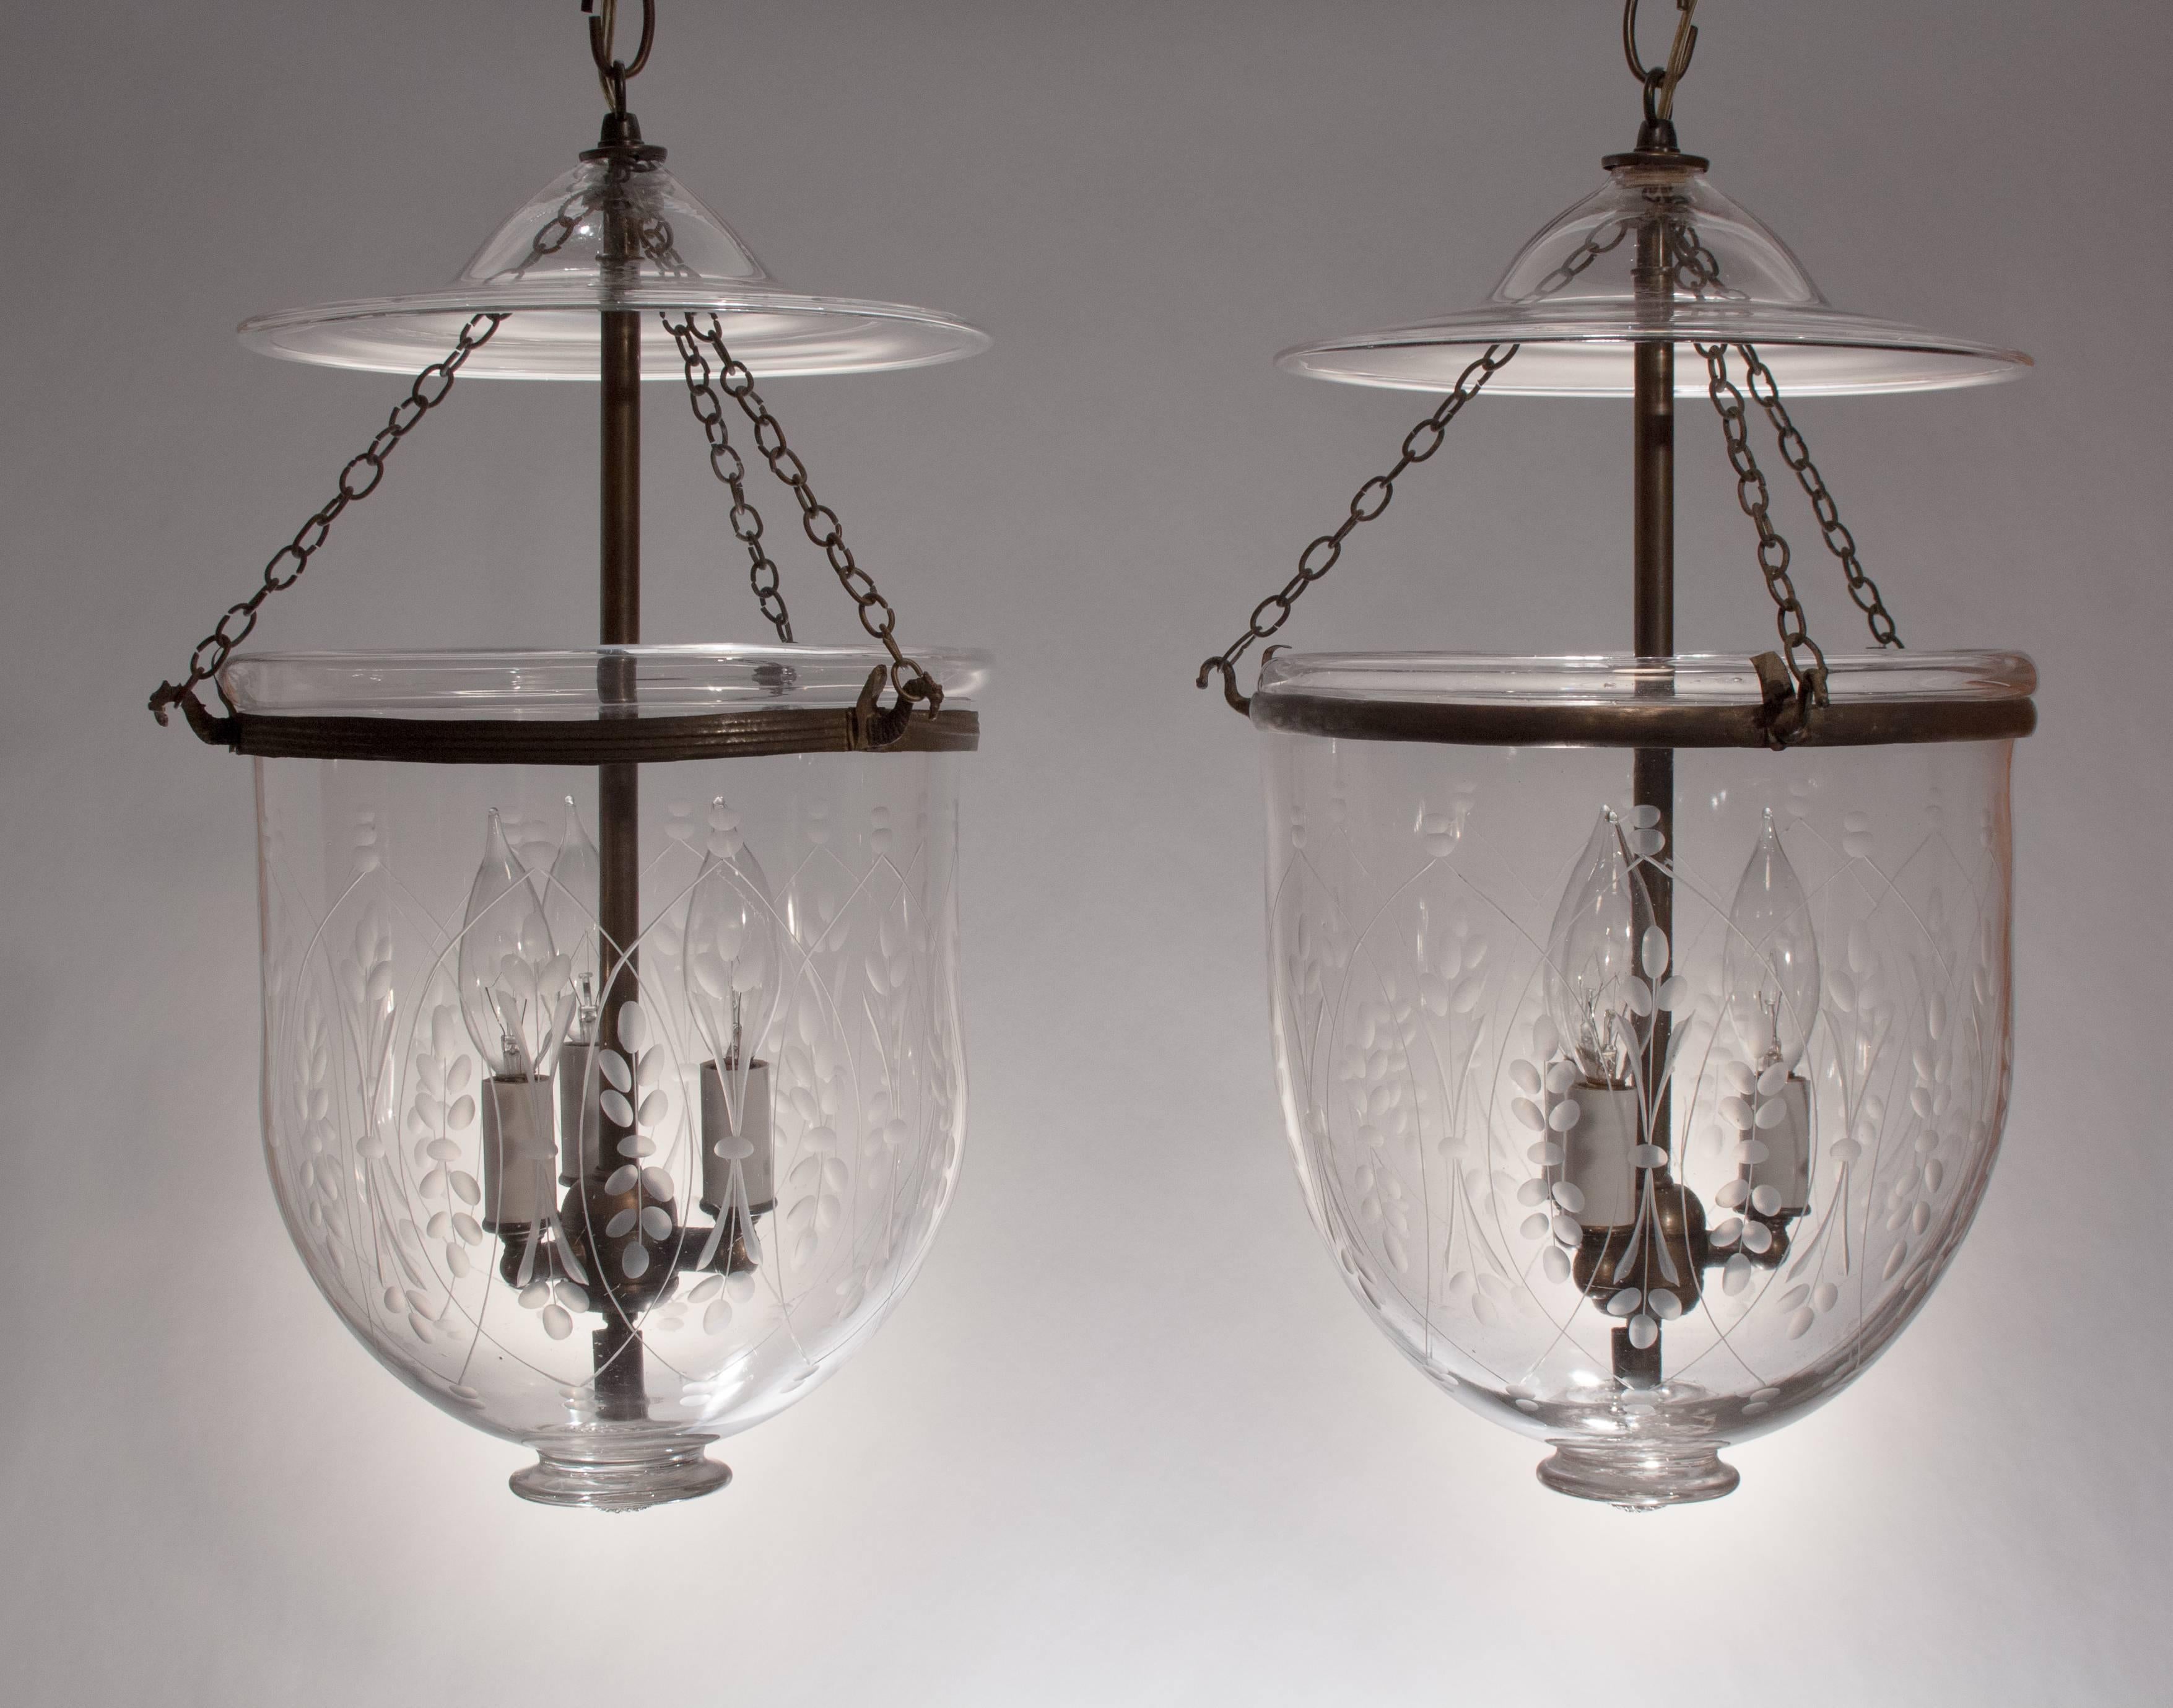 Charming pair of 19th century English hand blown glass bell jar lanterns with a finely etched wheat design that complements the full form of these hall lanterns. The bell jar lights, which feature their original smoke bells and chain, have been  